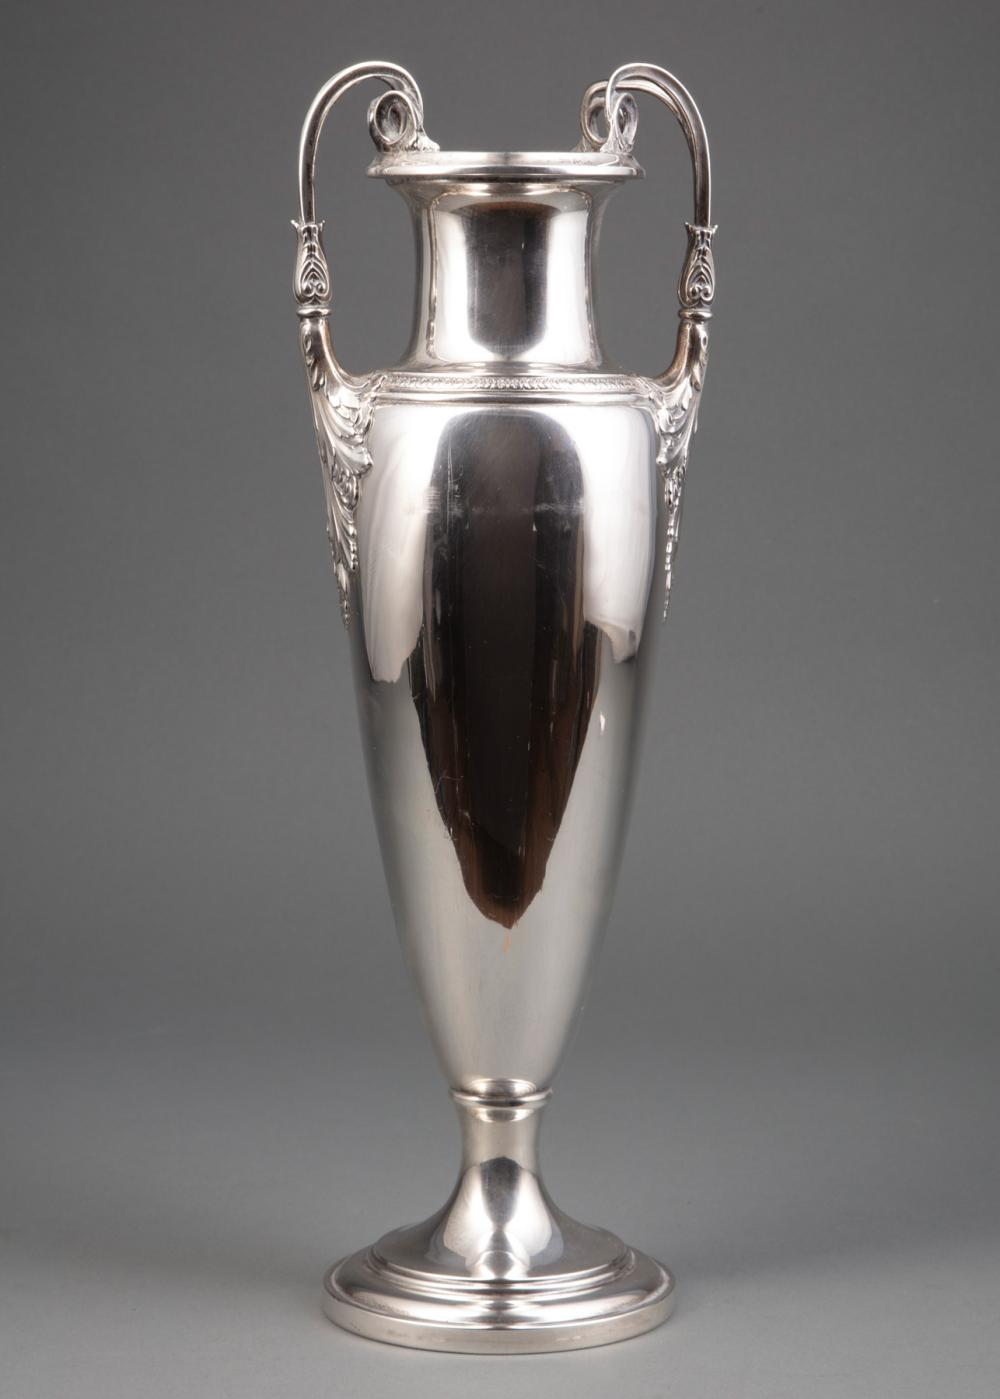 CHARTER CO. STERLING SILVER AMPHORA